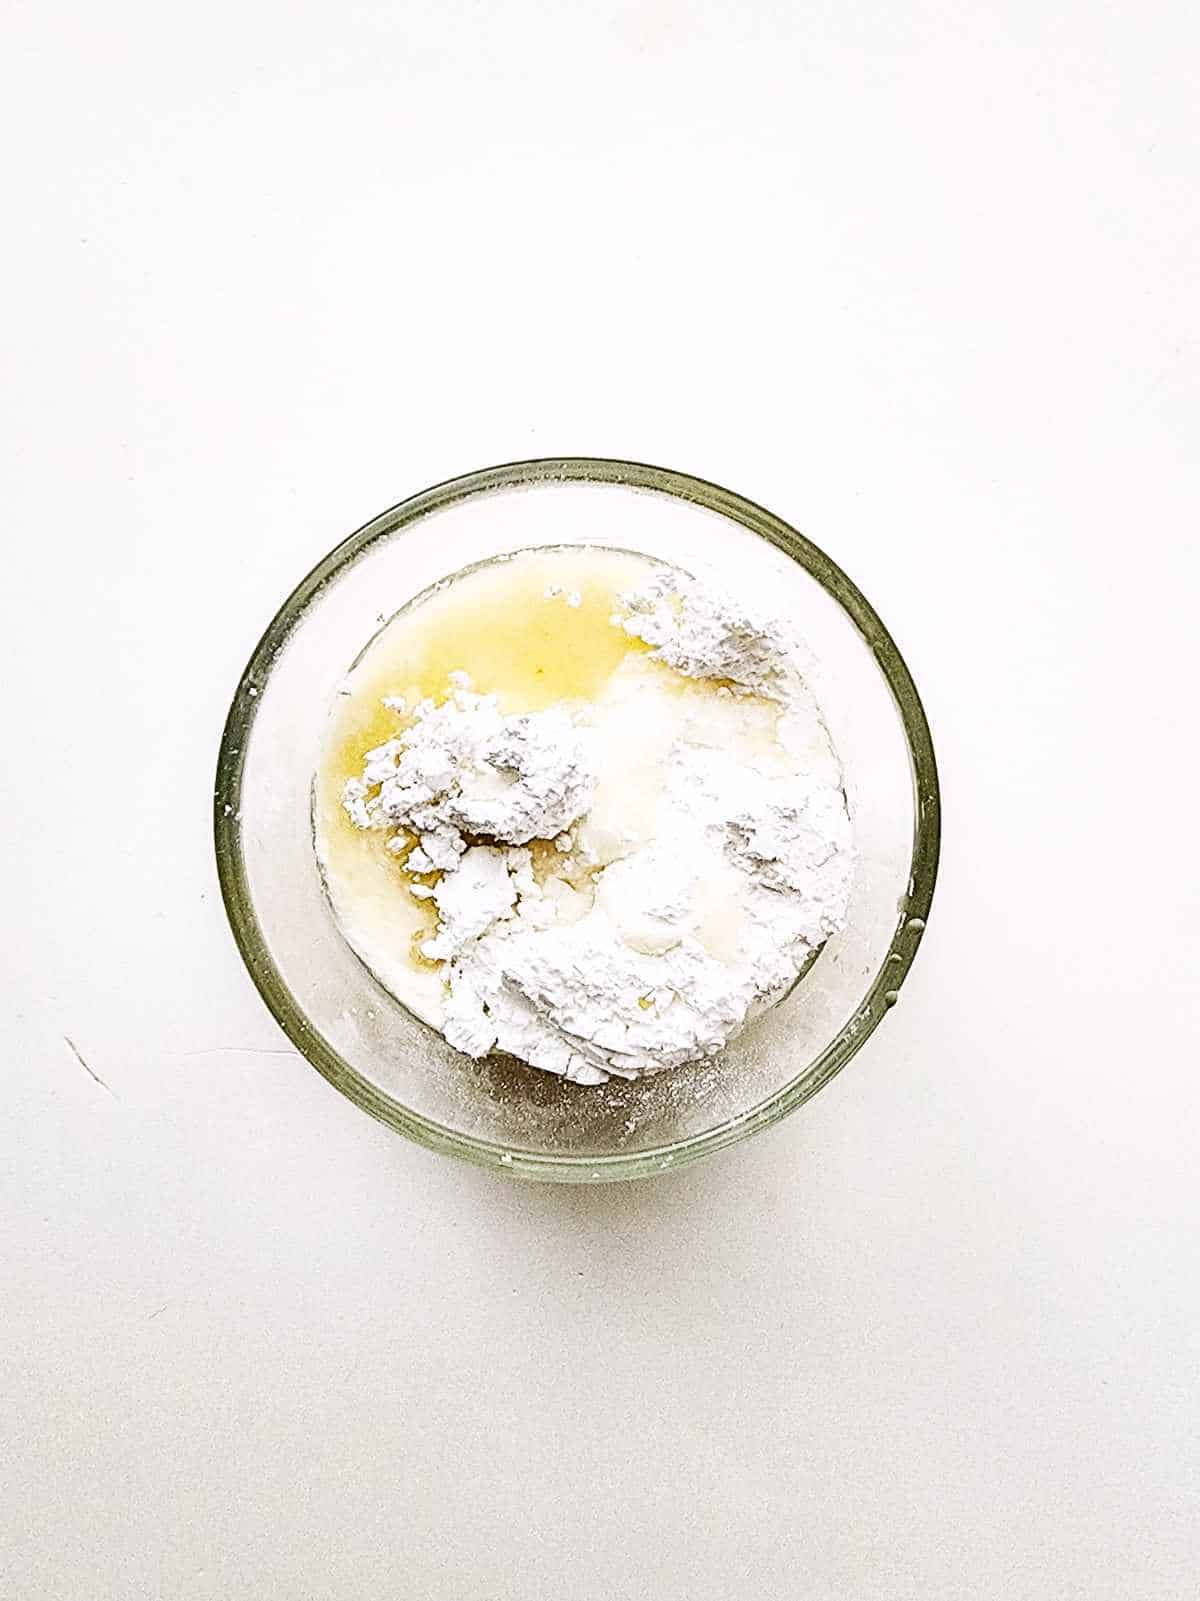 powdered sugar and lemon juice in a bowl for icing.